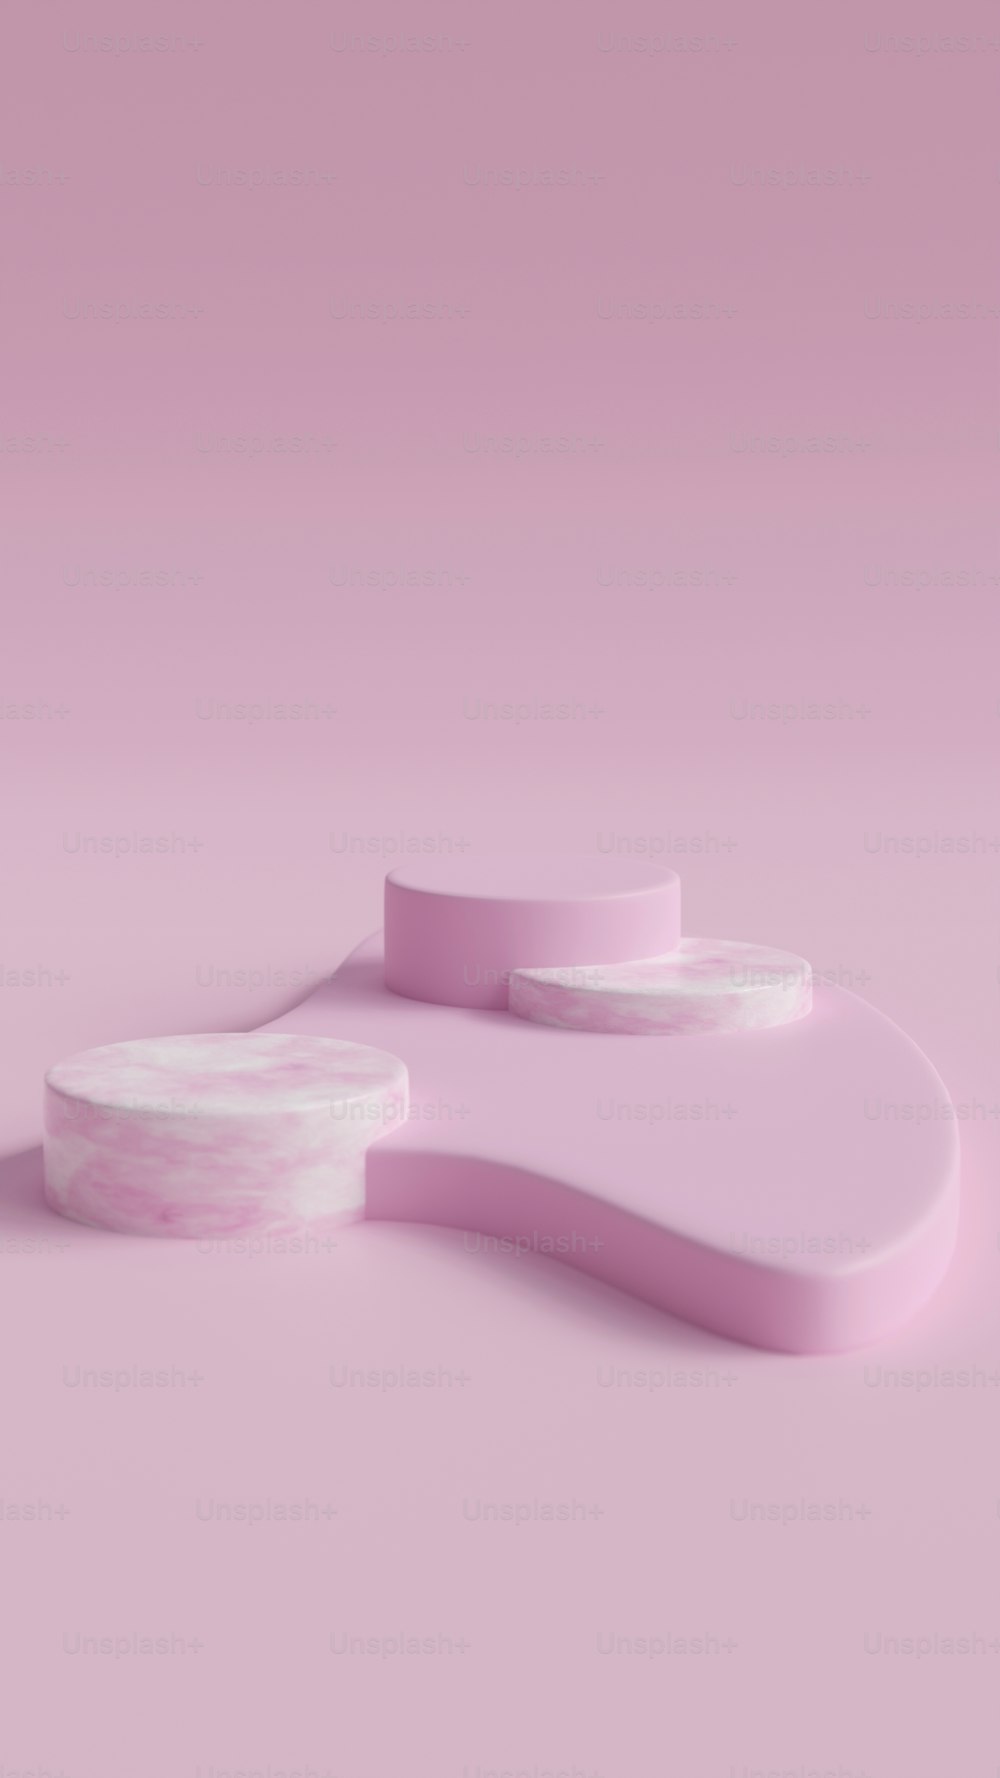 a pink and white object on a pink background